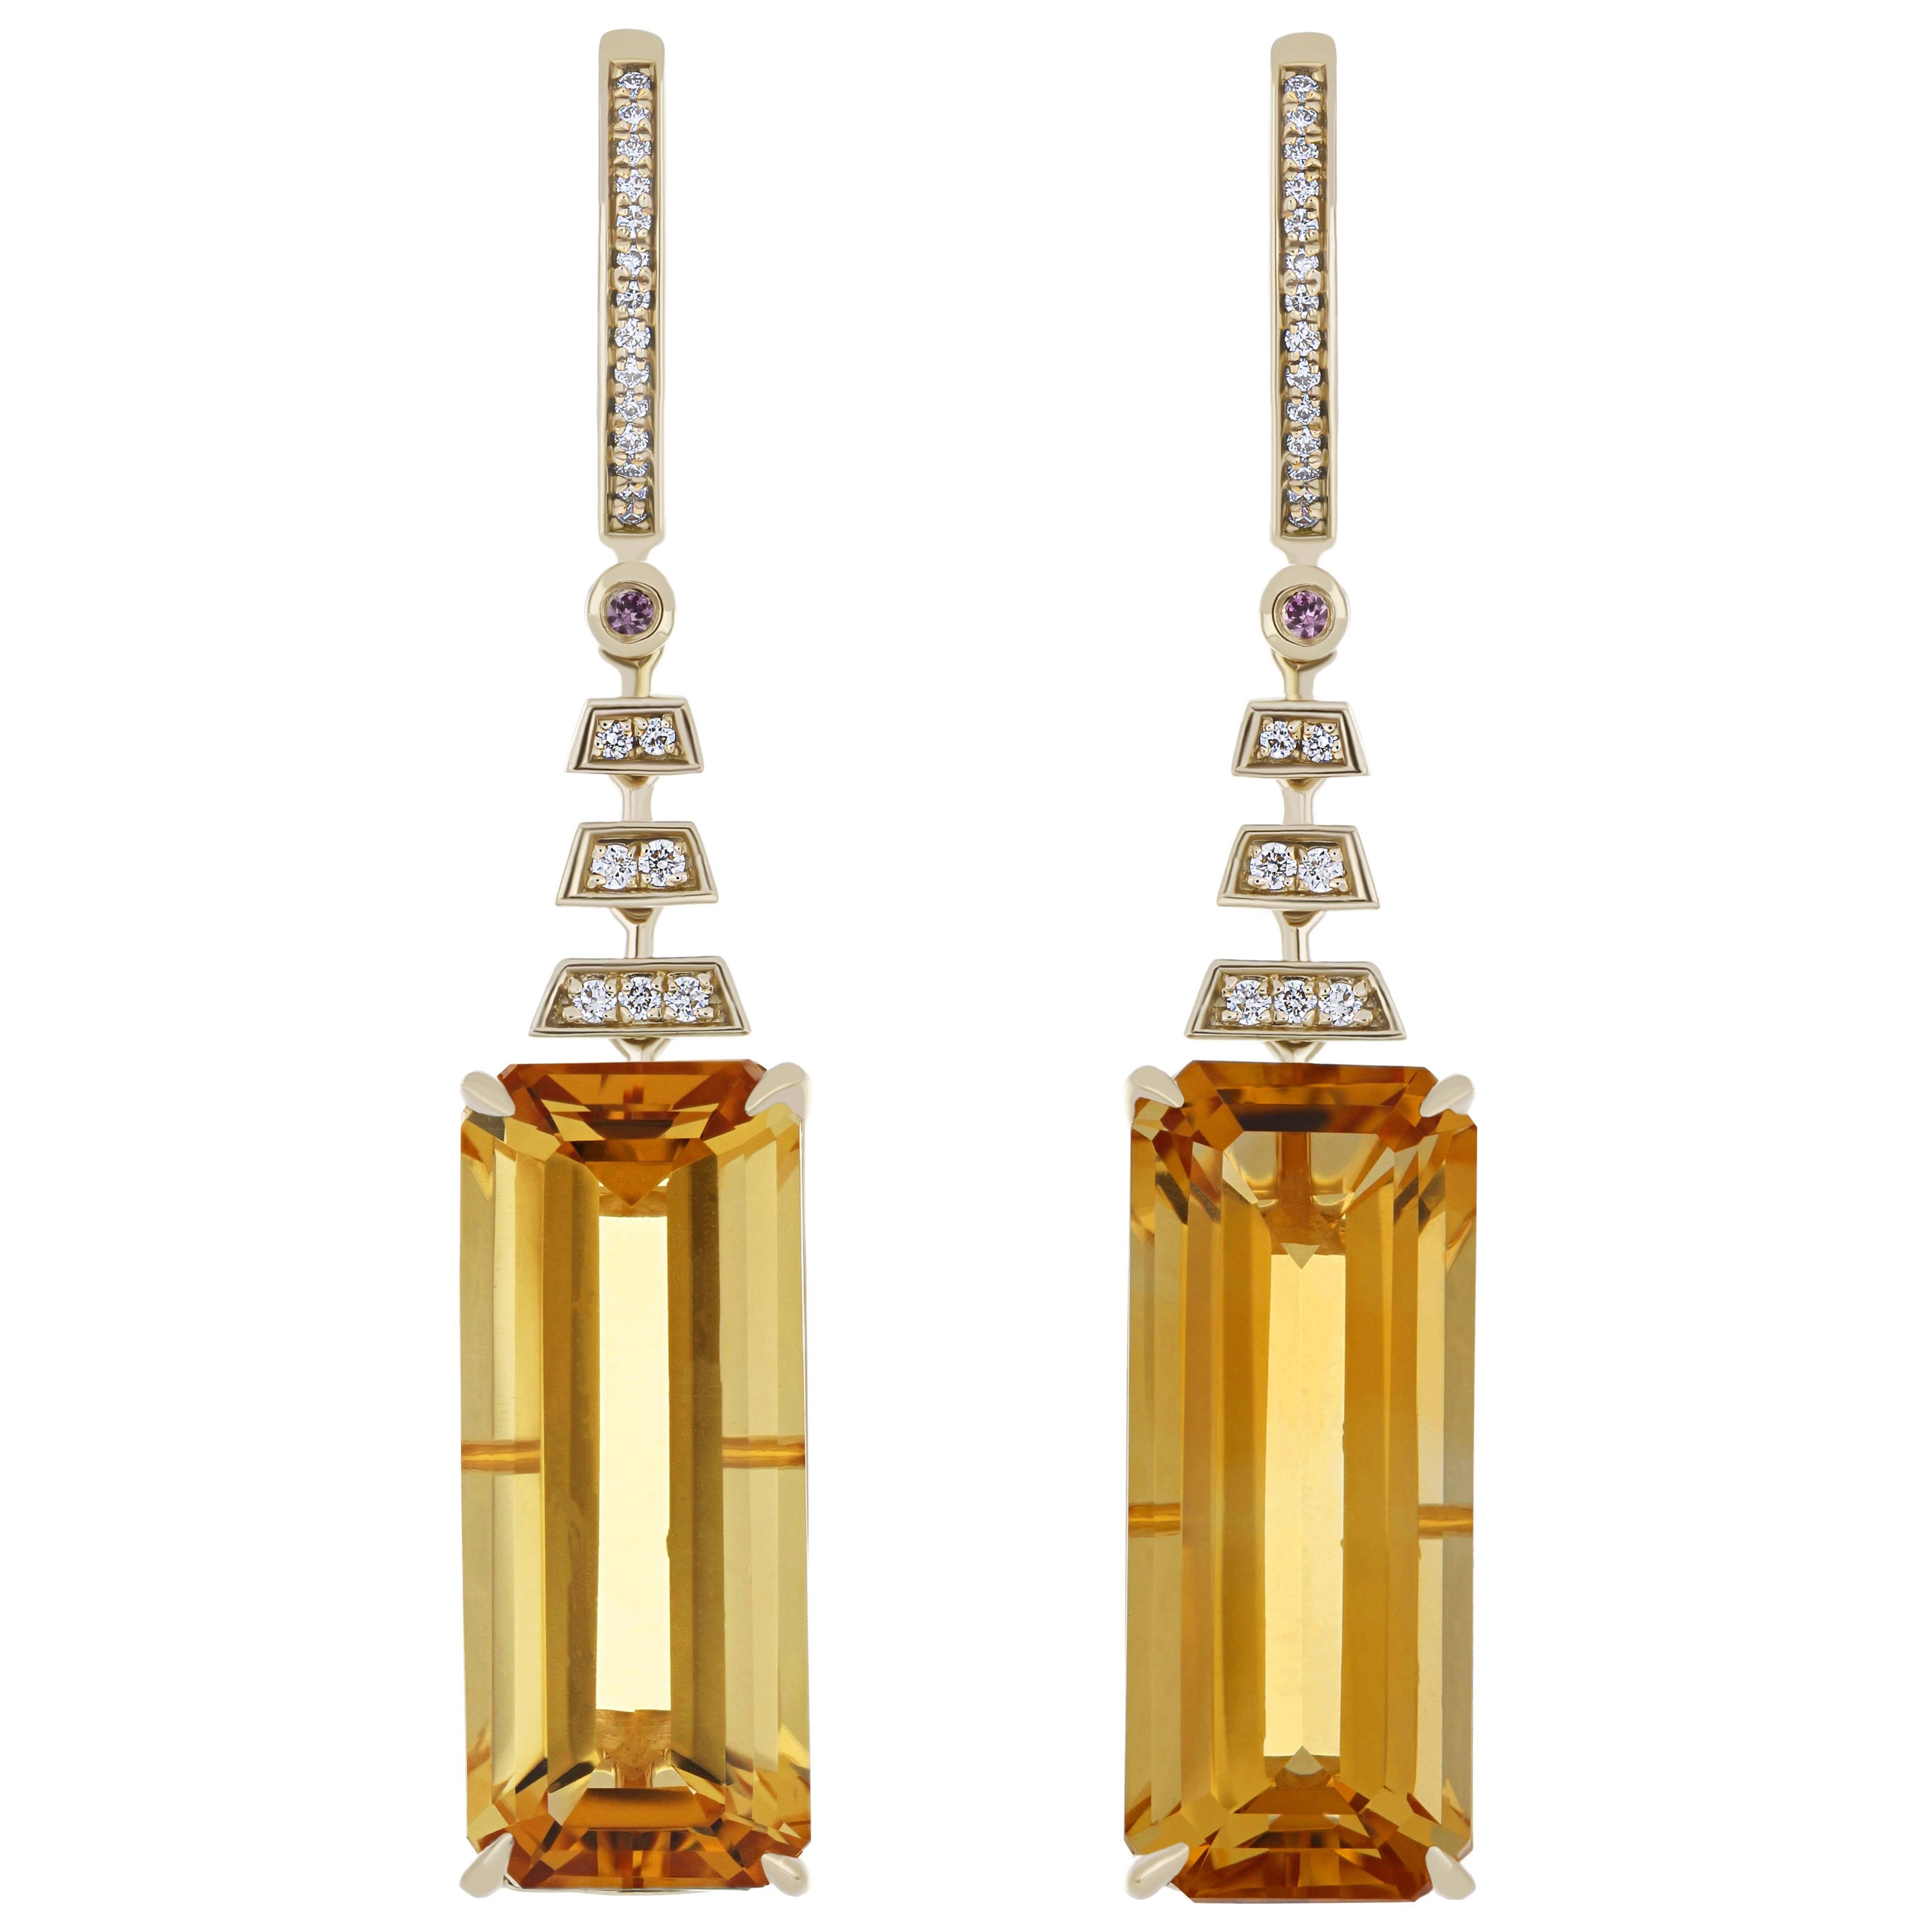 15.55CTs Citrine, Pink Sapphire and Diamond Earring in 14Karat Yellow Gold 